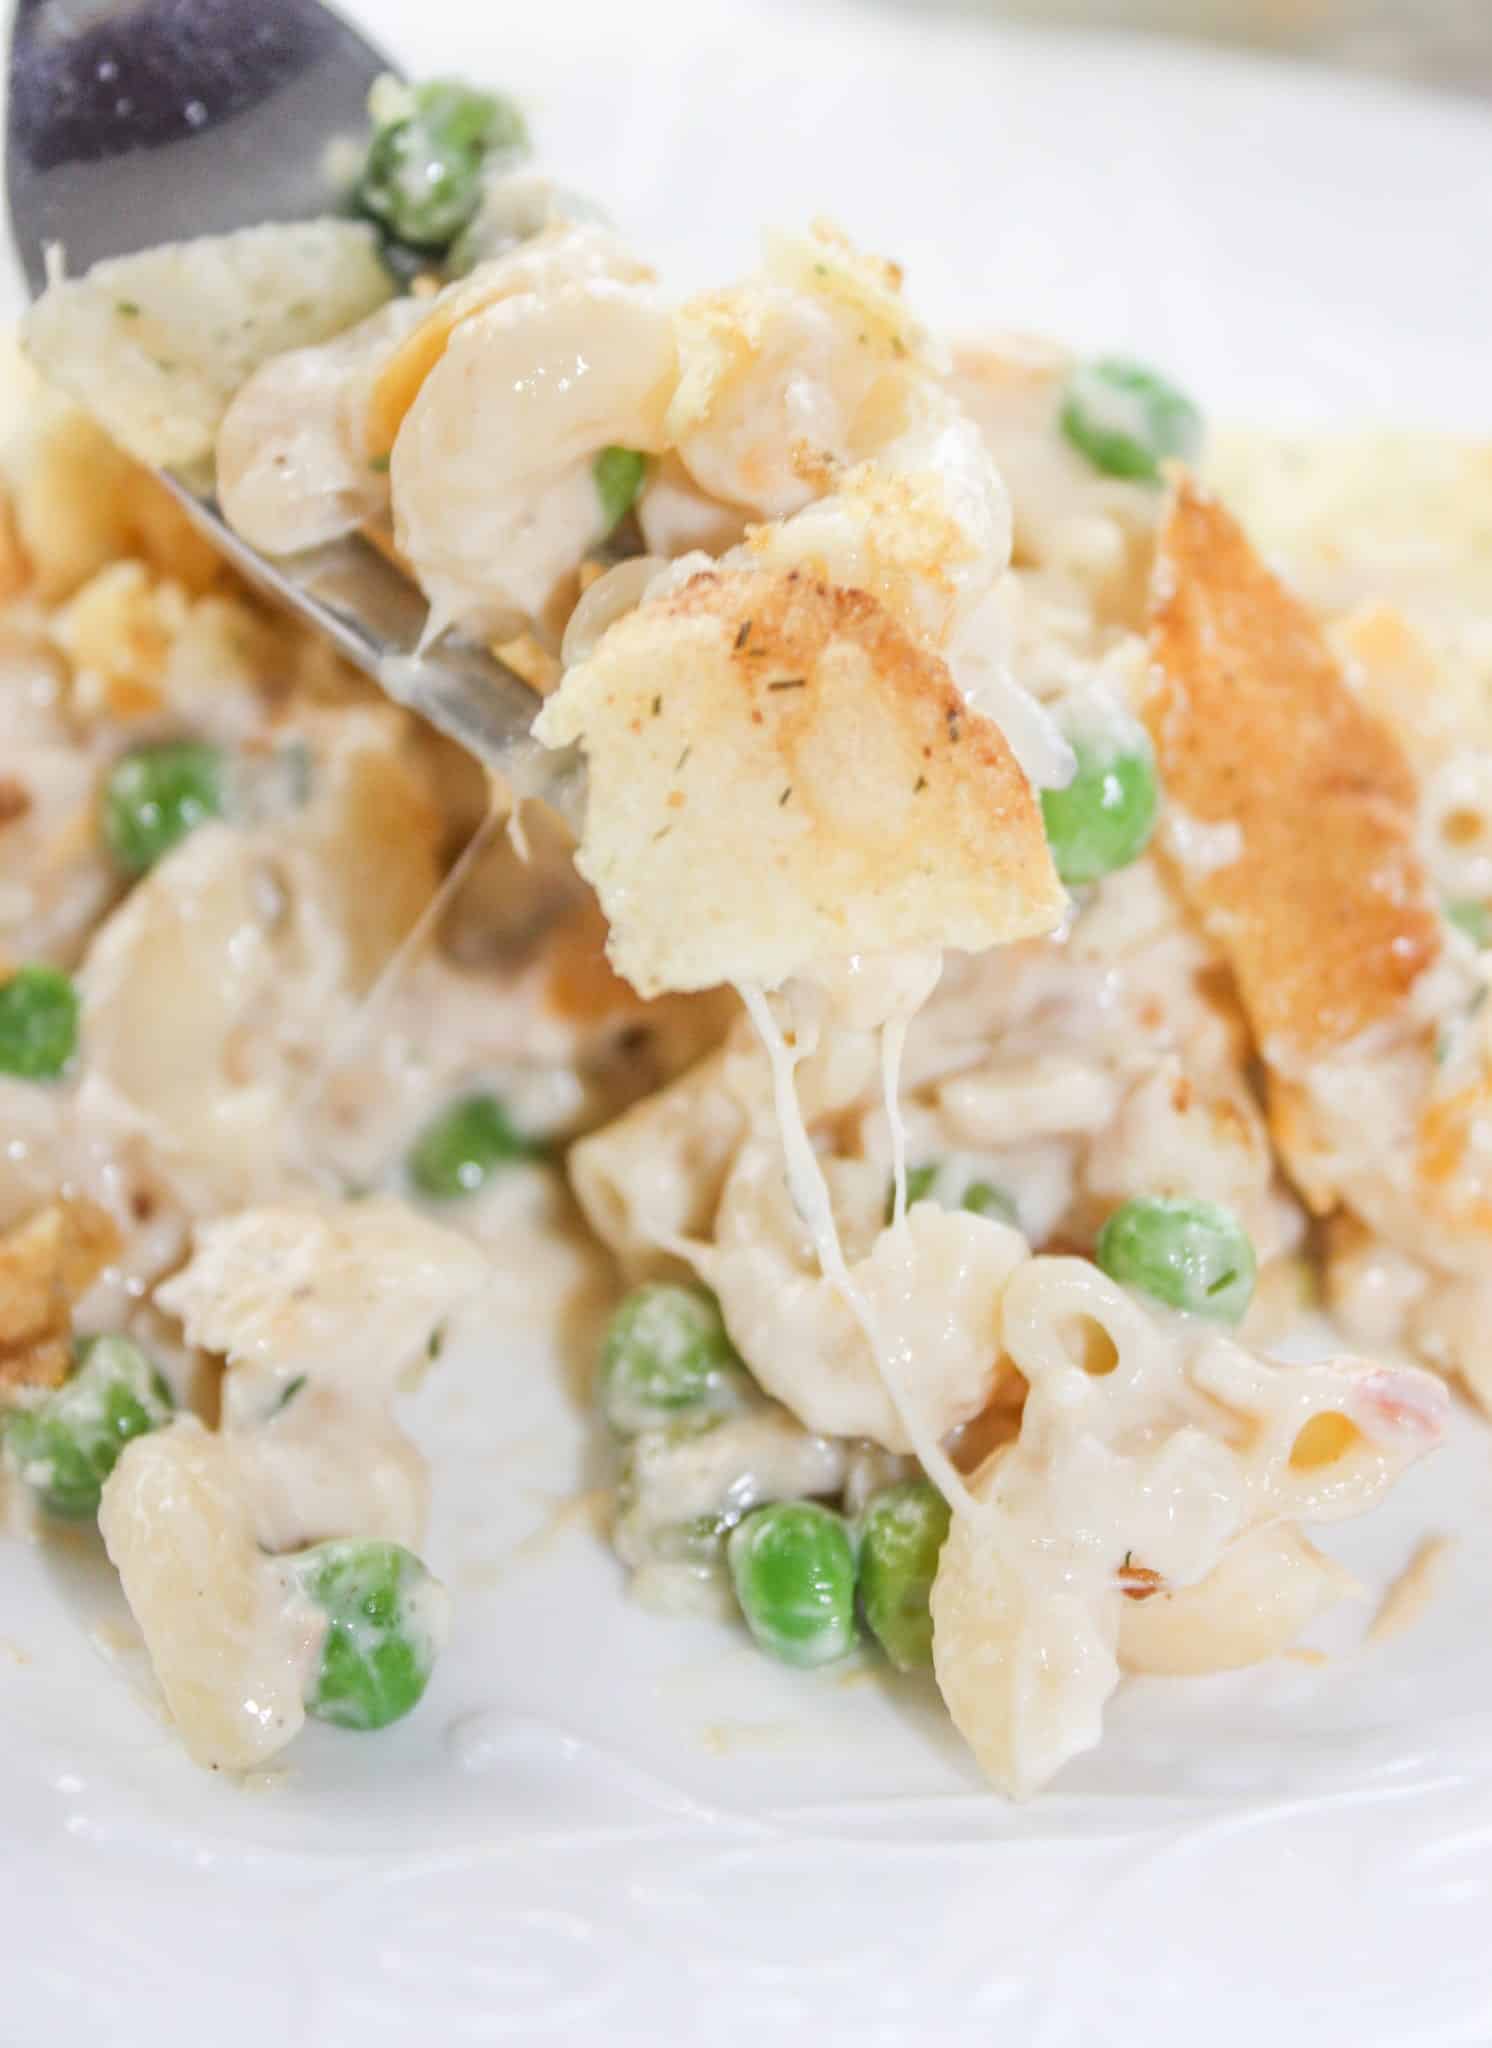 Gluten Free Tuna Casserole is an easy dinner recipe that combines canned tuna with cheesy pasta and frozen peas. This gluten free version of a family staple will not disappoint!